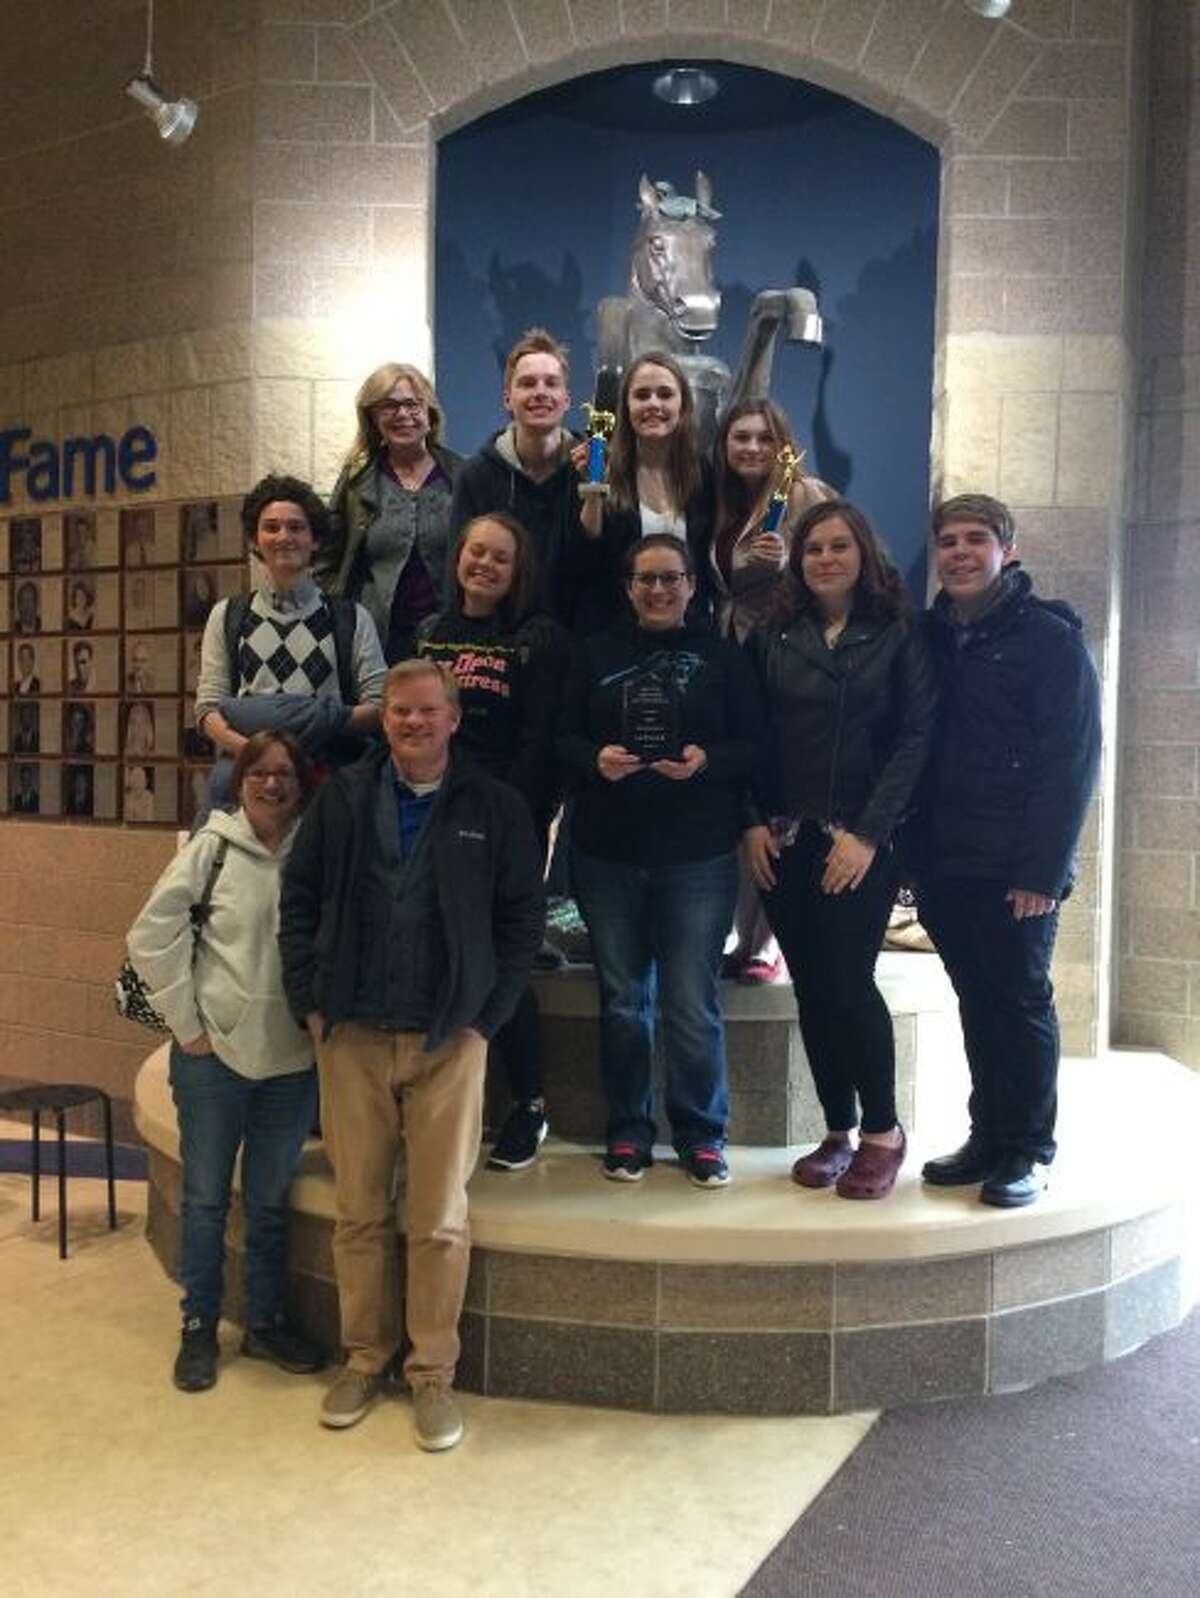 The Manistee High School Forensics team made a good showing at the Best of the West Invitational at Portage Central last weekend and are preparing for the upcoming regional and state tournament.